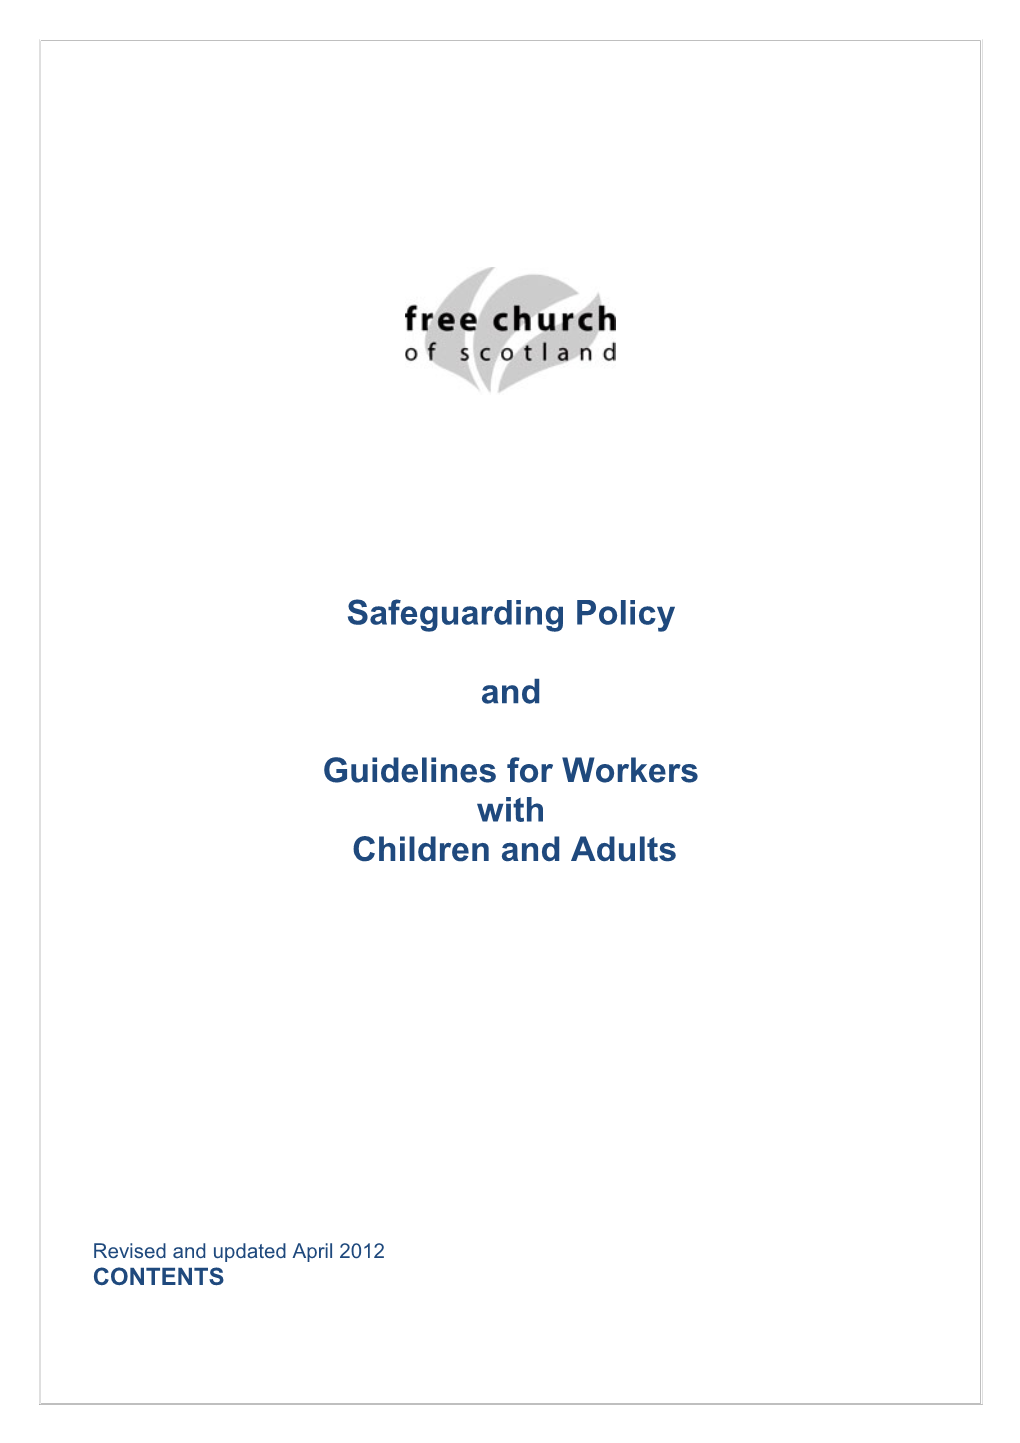 Safeguarding Policy s1